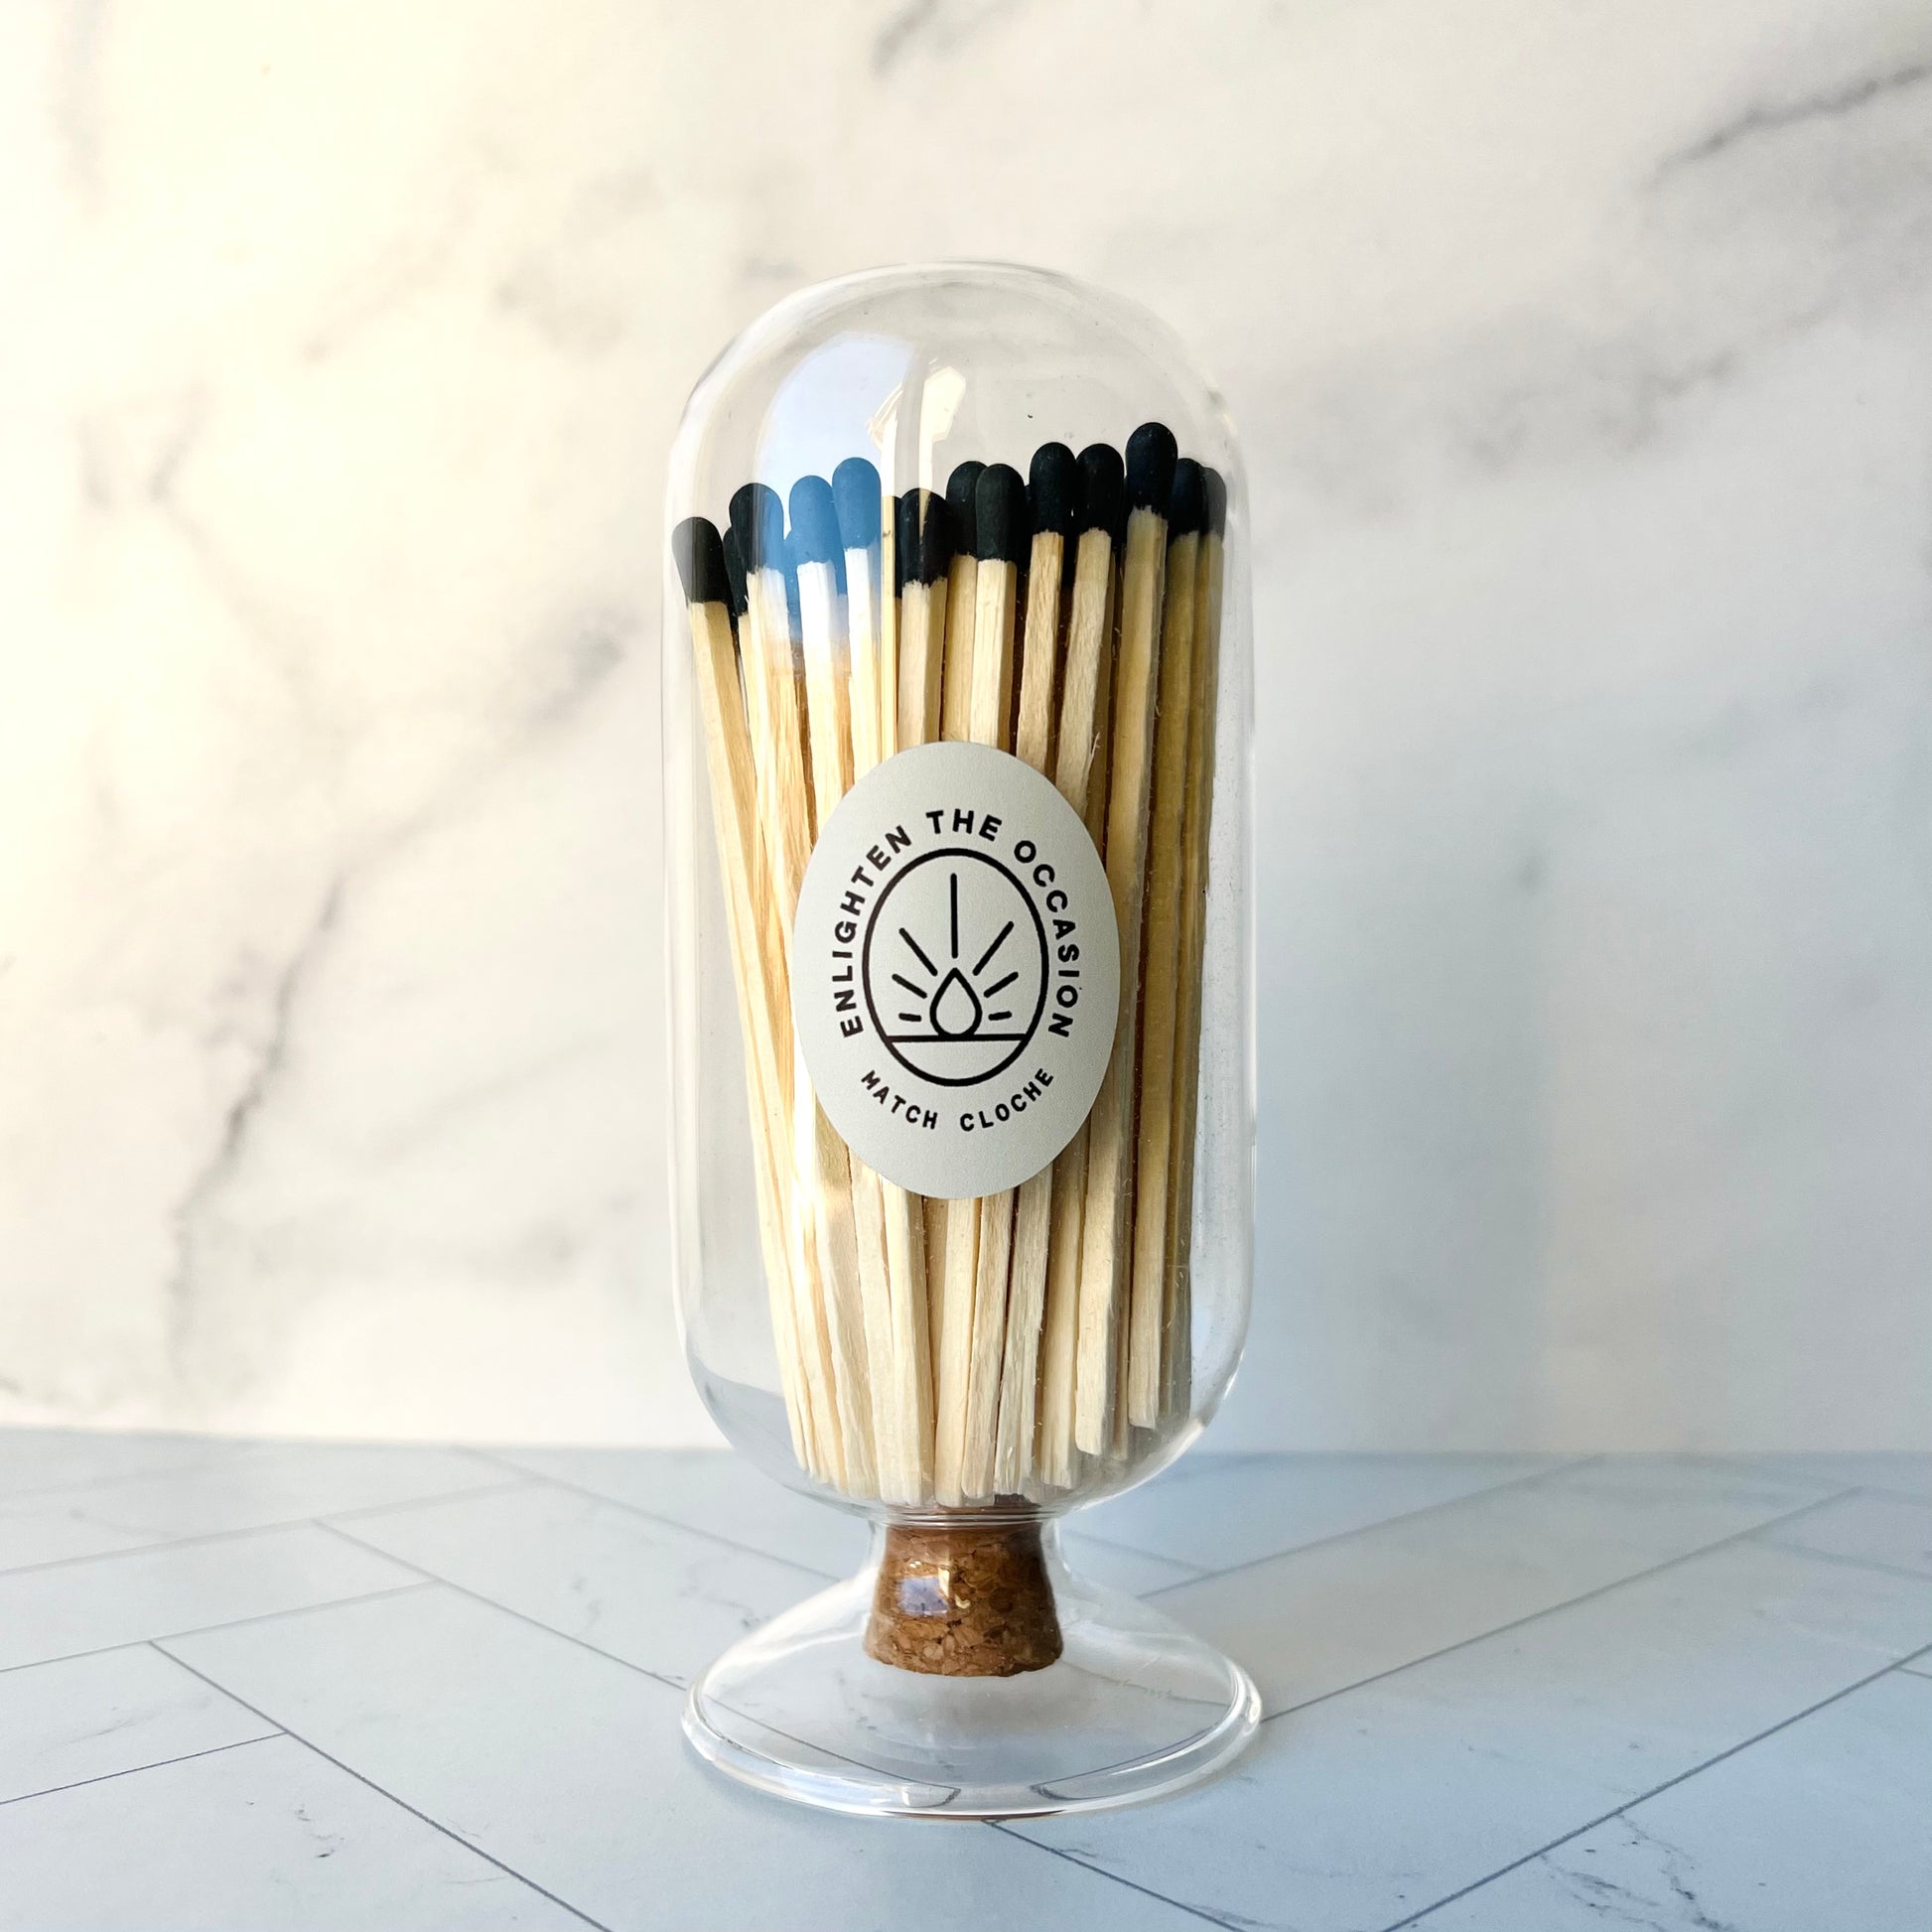 A clear glass cloche with a cork stopper on the bottom and filled with matches with black tips